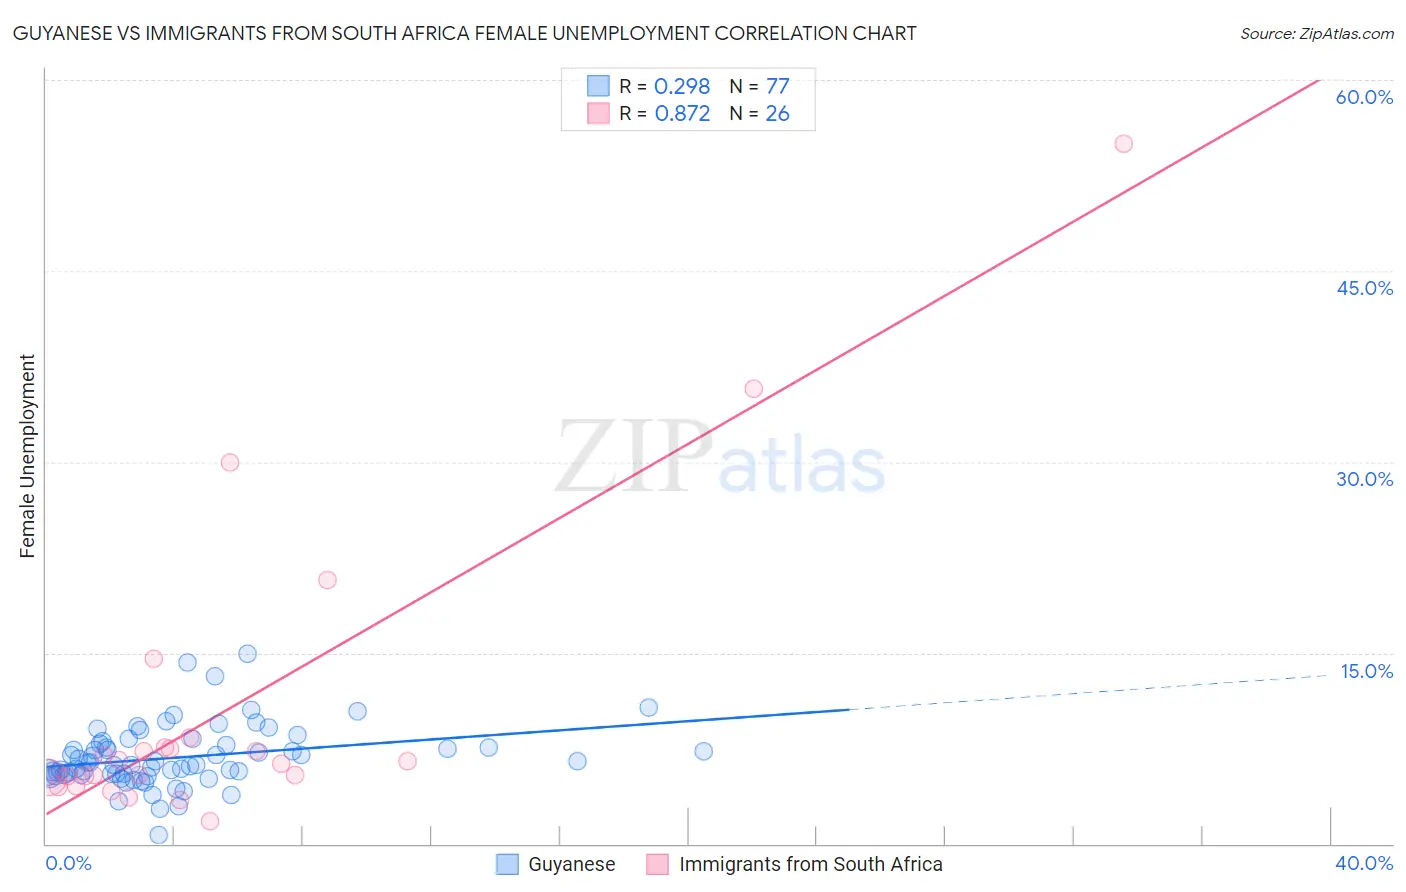 Guyanese vs Immigrants from South Africa Female Unemployment